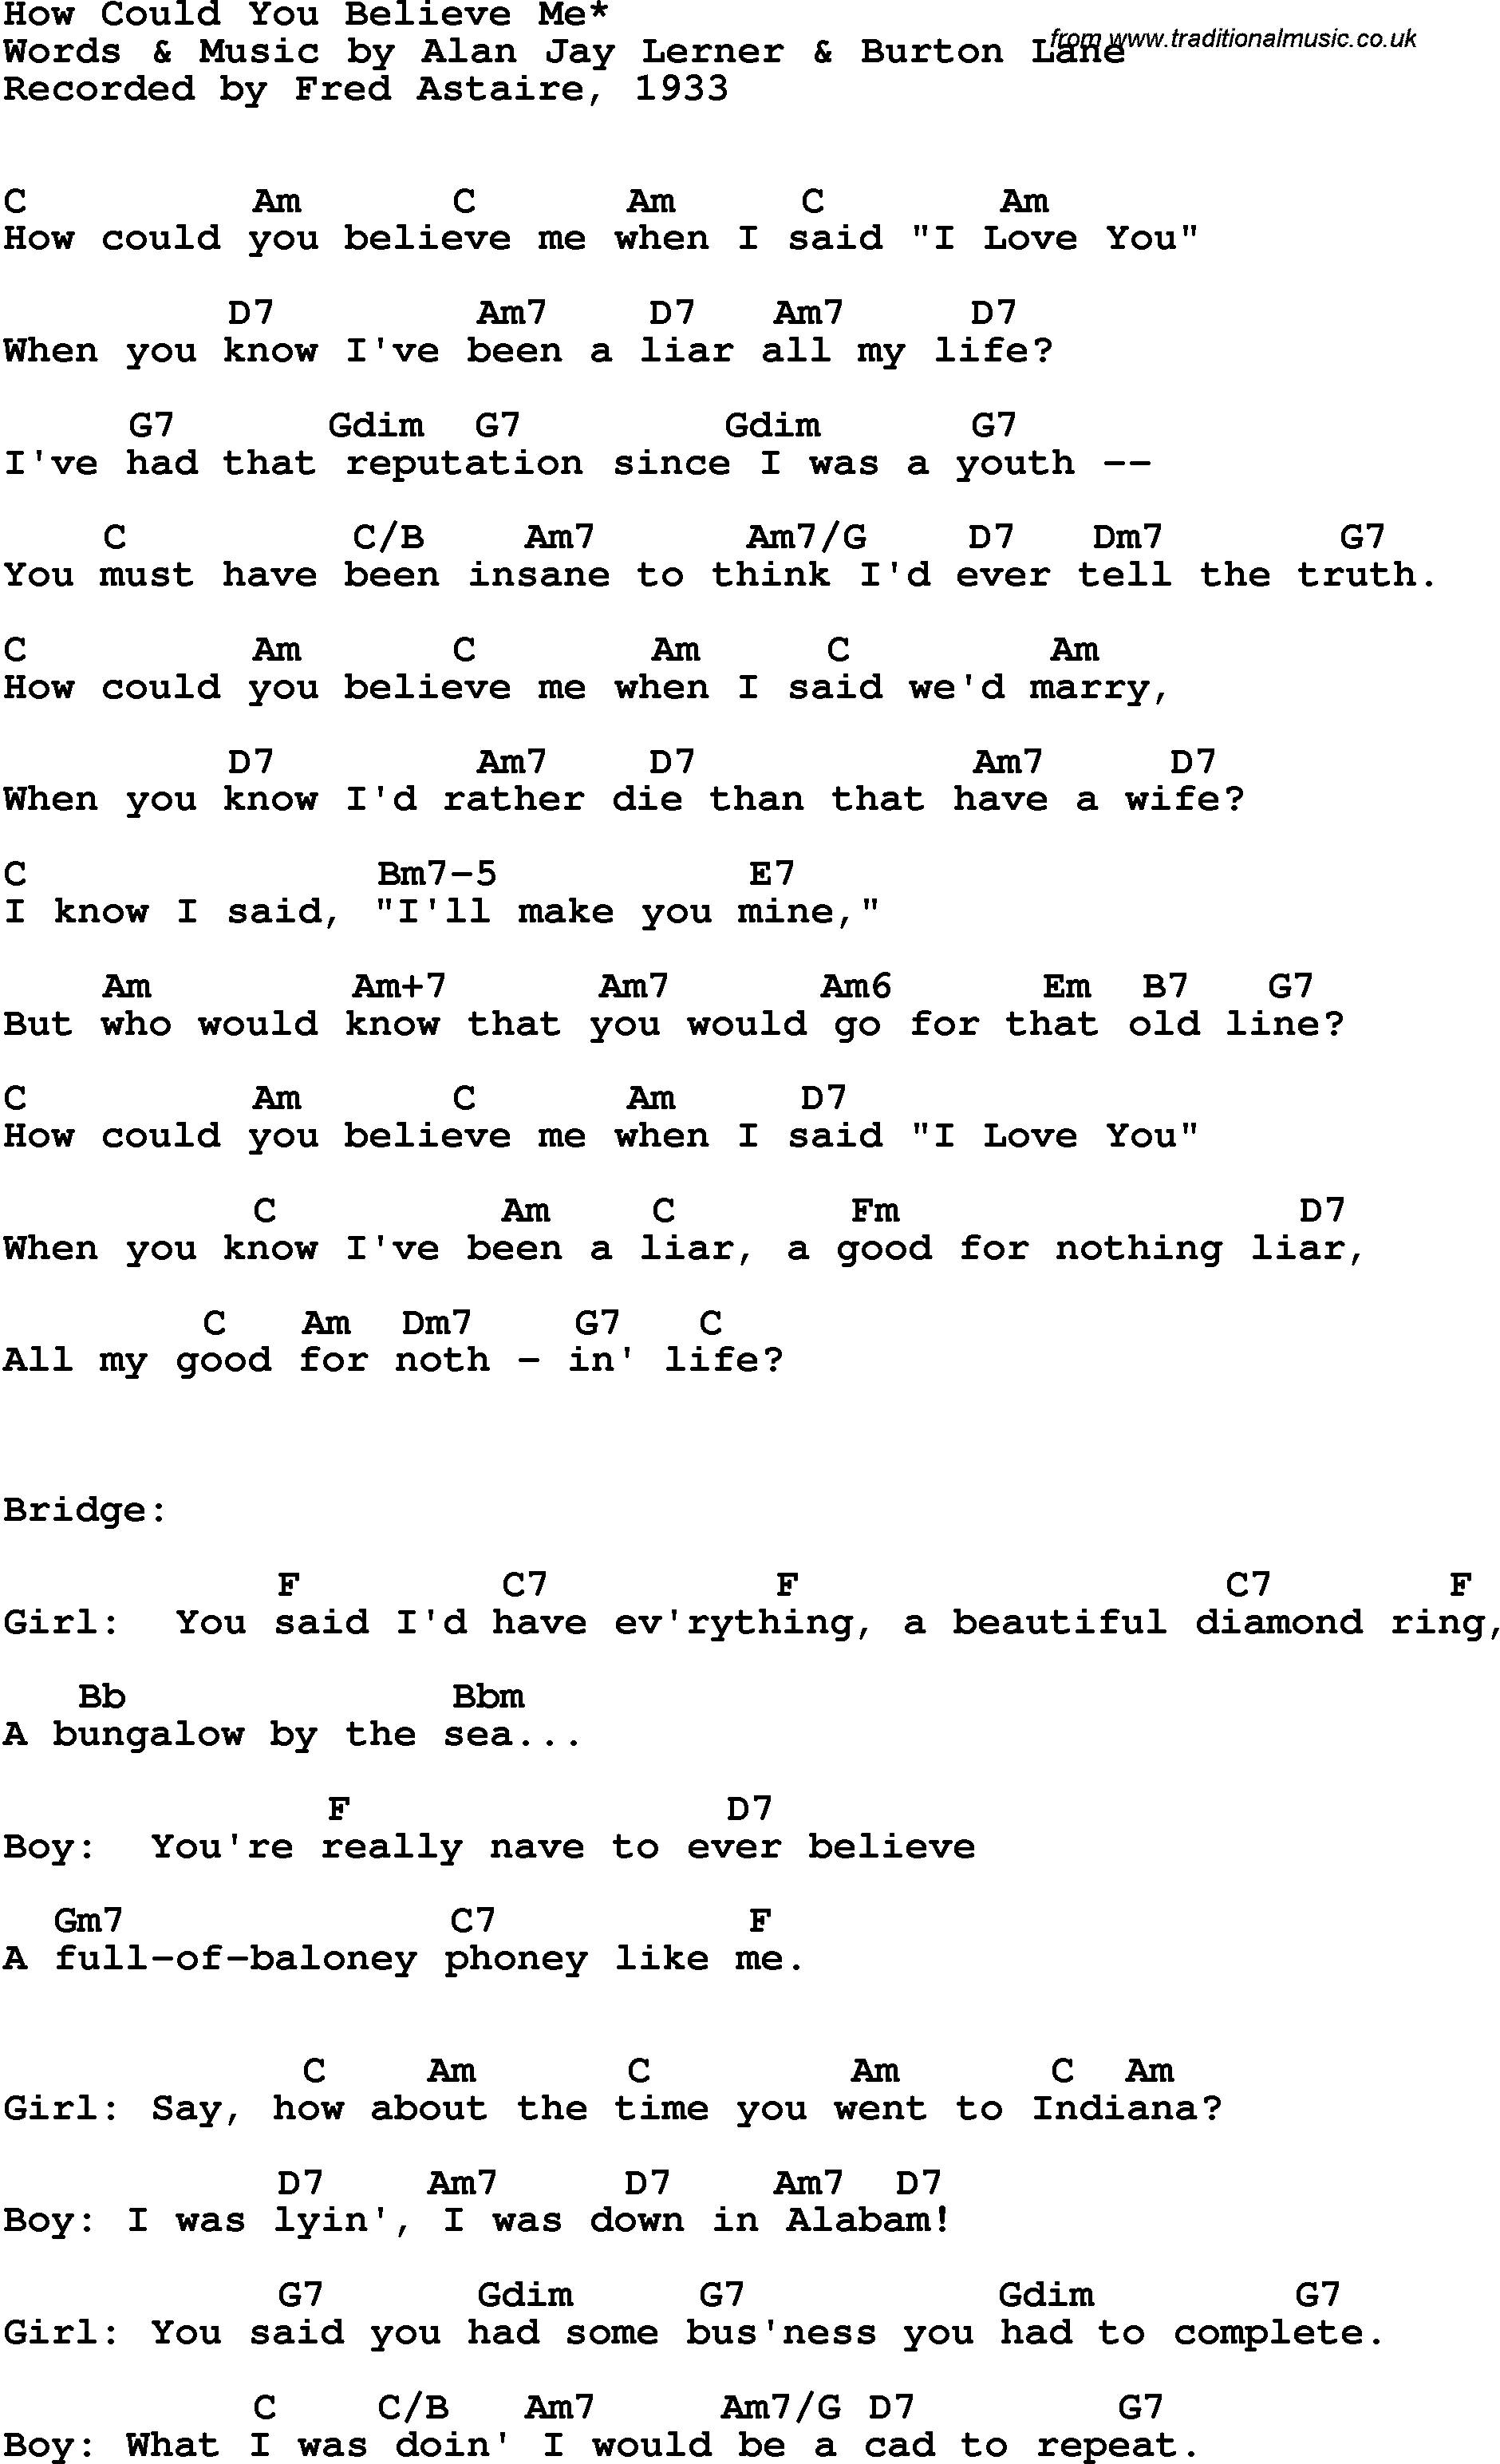 Song Lyrics with guitar chords for How Could You Believe Me - Fred Astaire, 1933